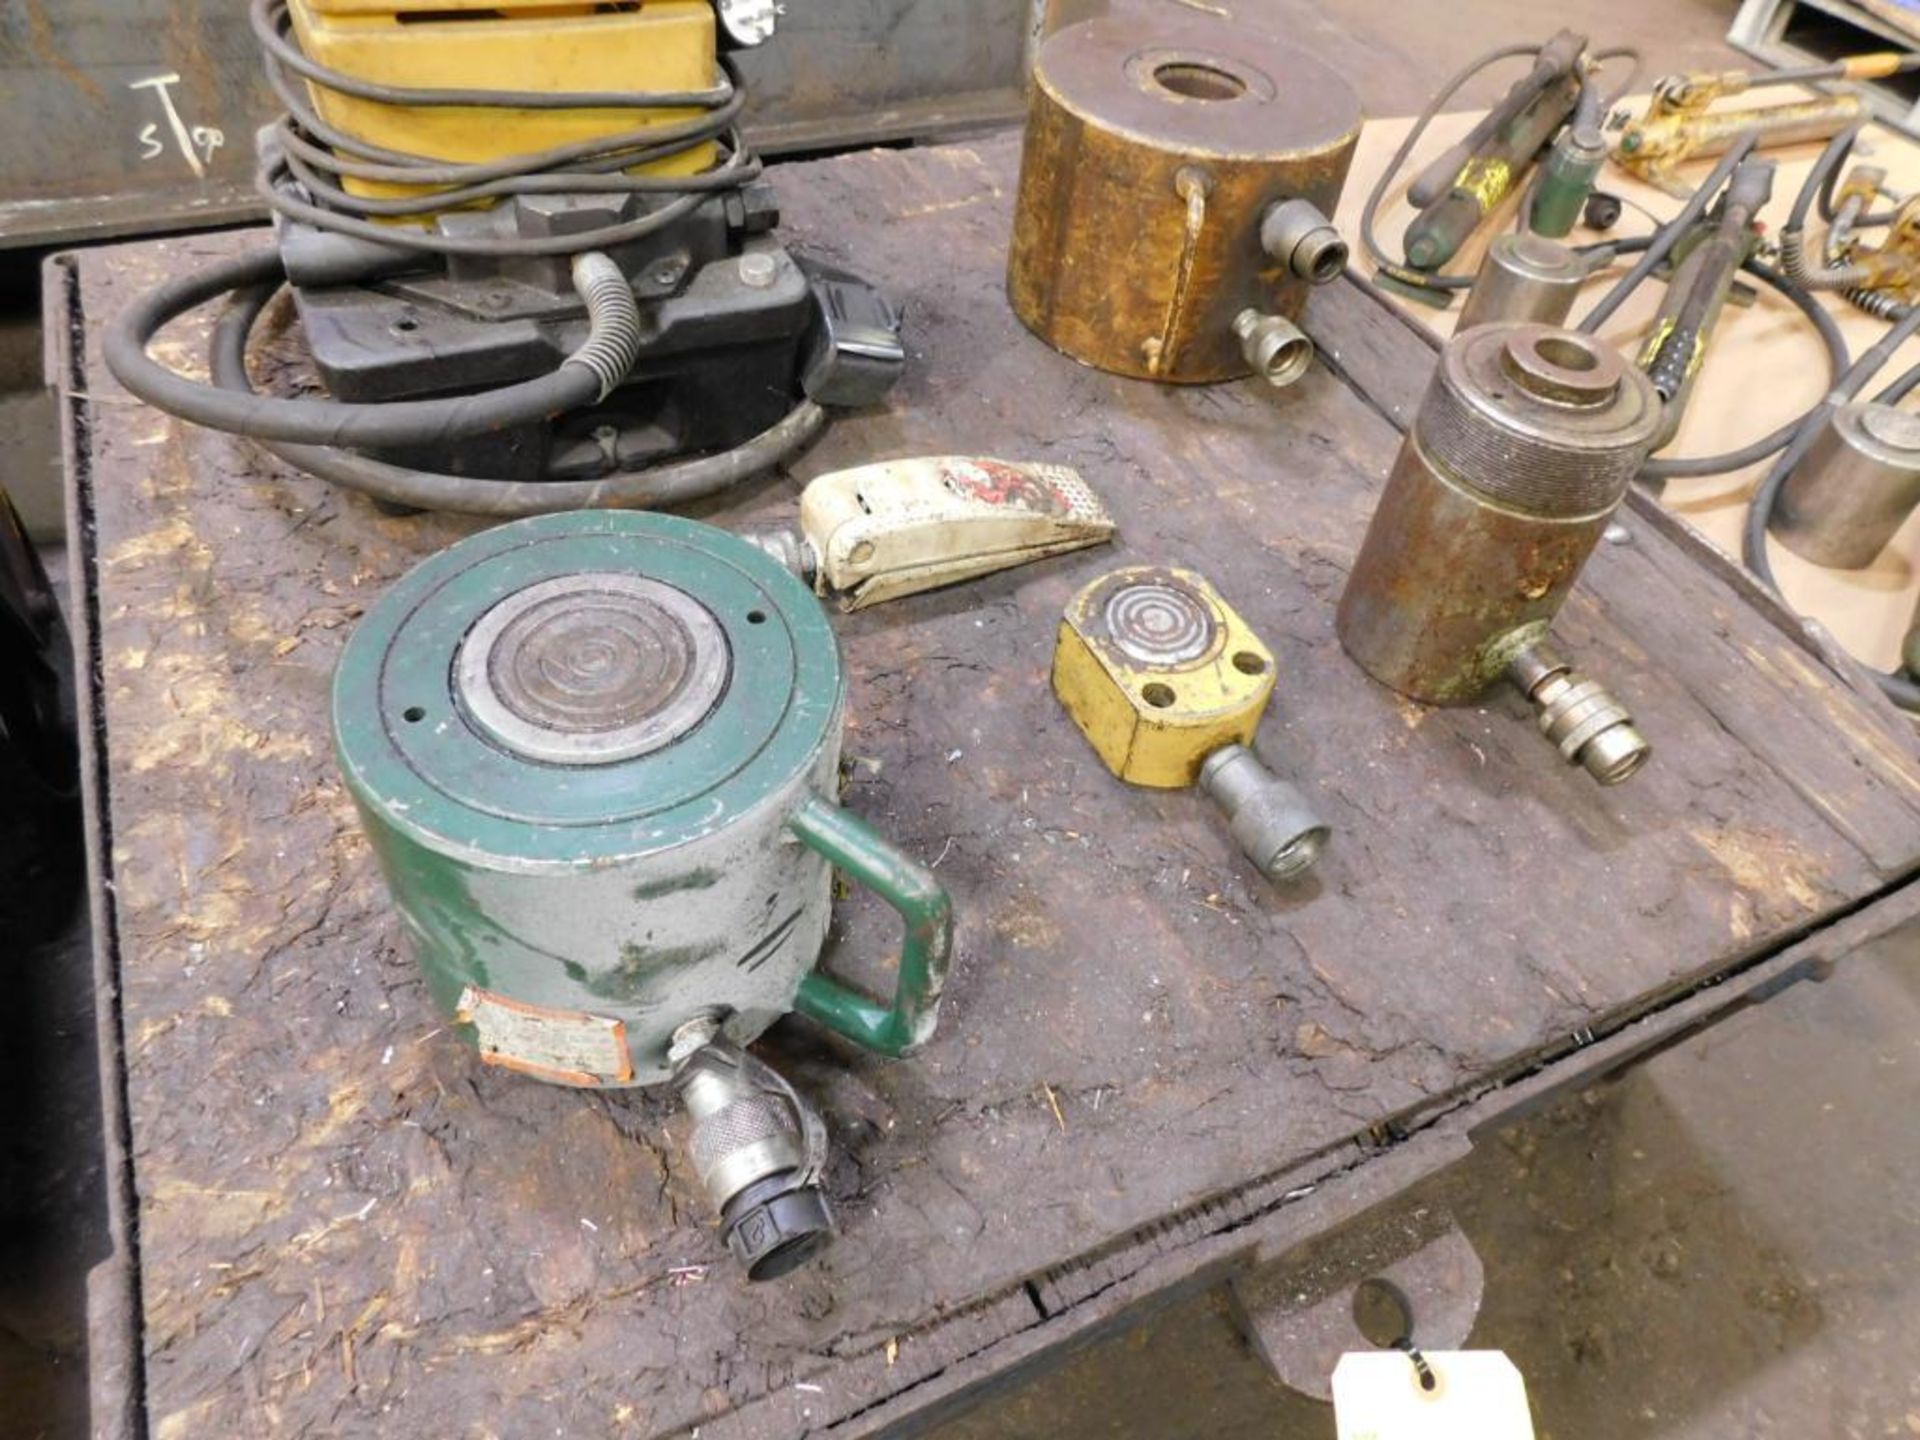 LOT: Enerpac Electric Hydraulic Power Unit w/Hand Control and Accessories - Image 5 of 5